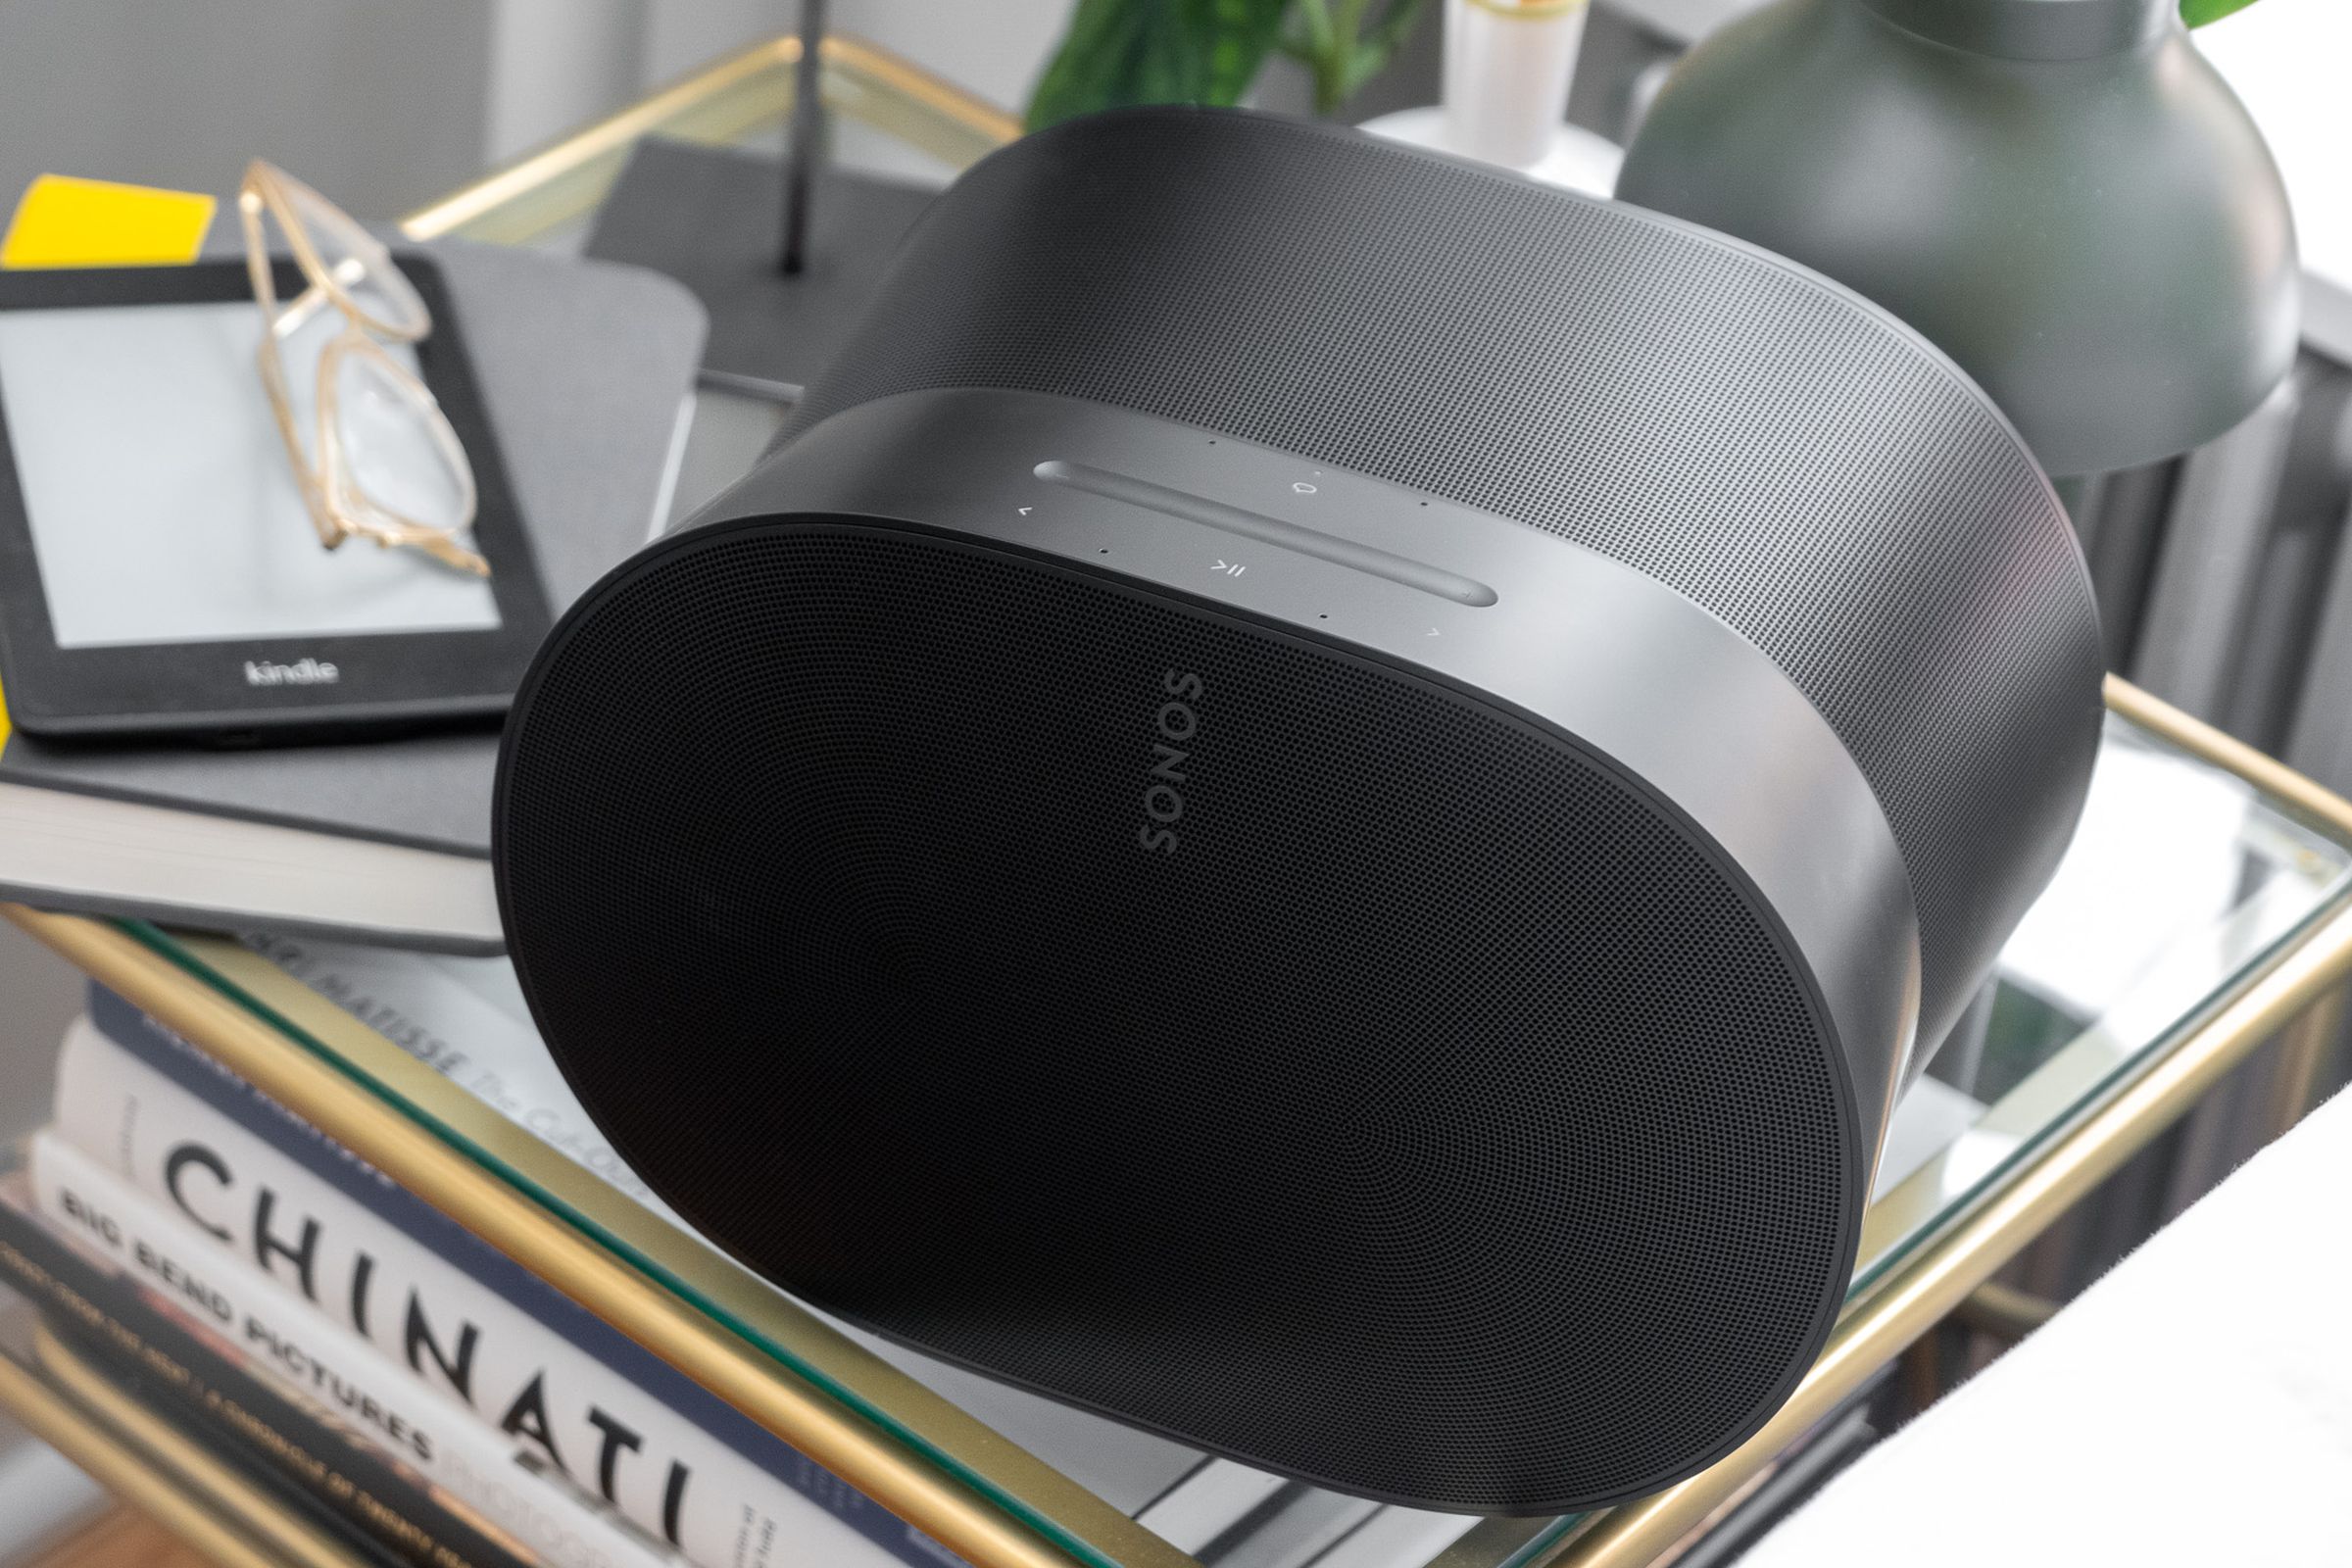 A photo of the Sonos Era 300 on a bedside table.